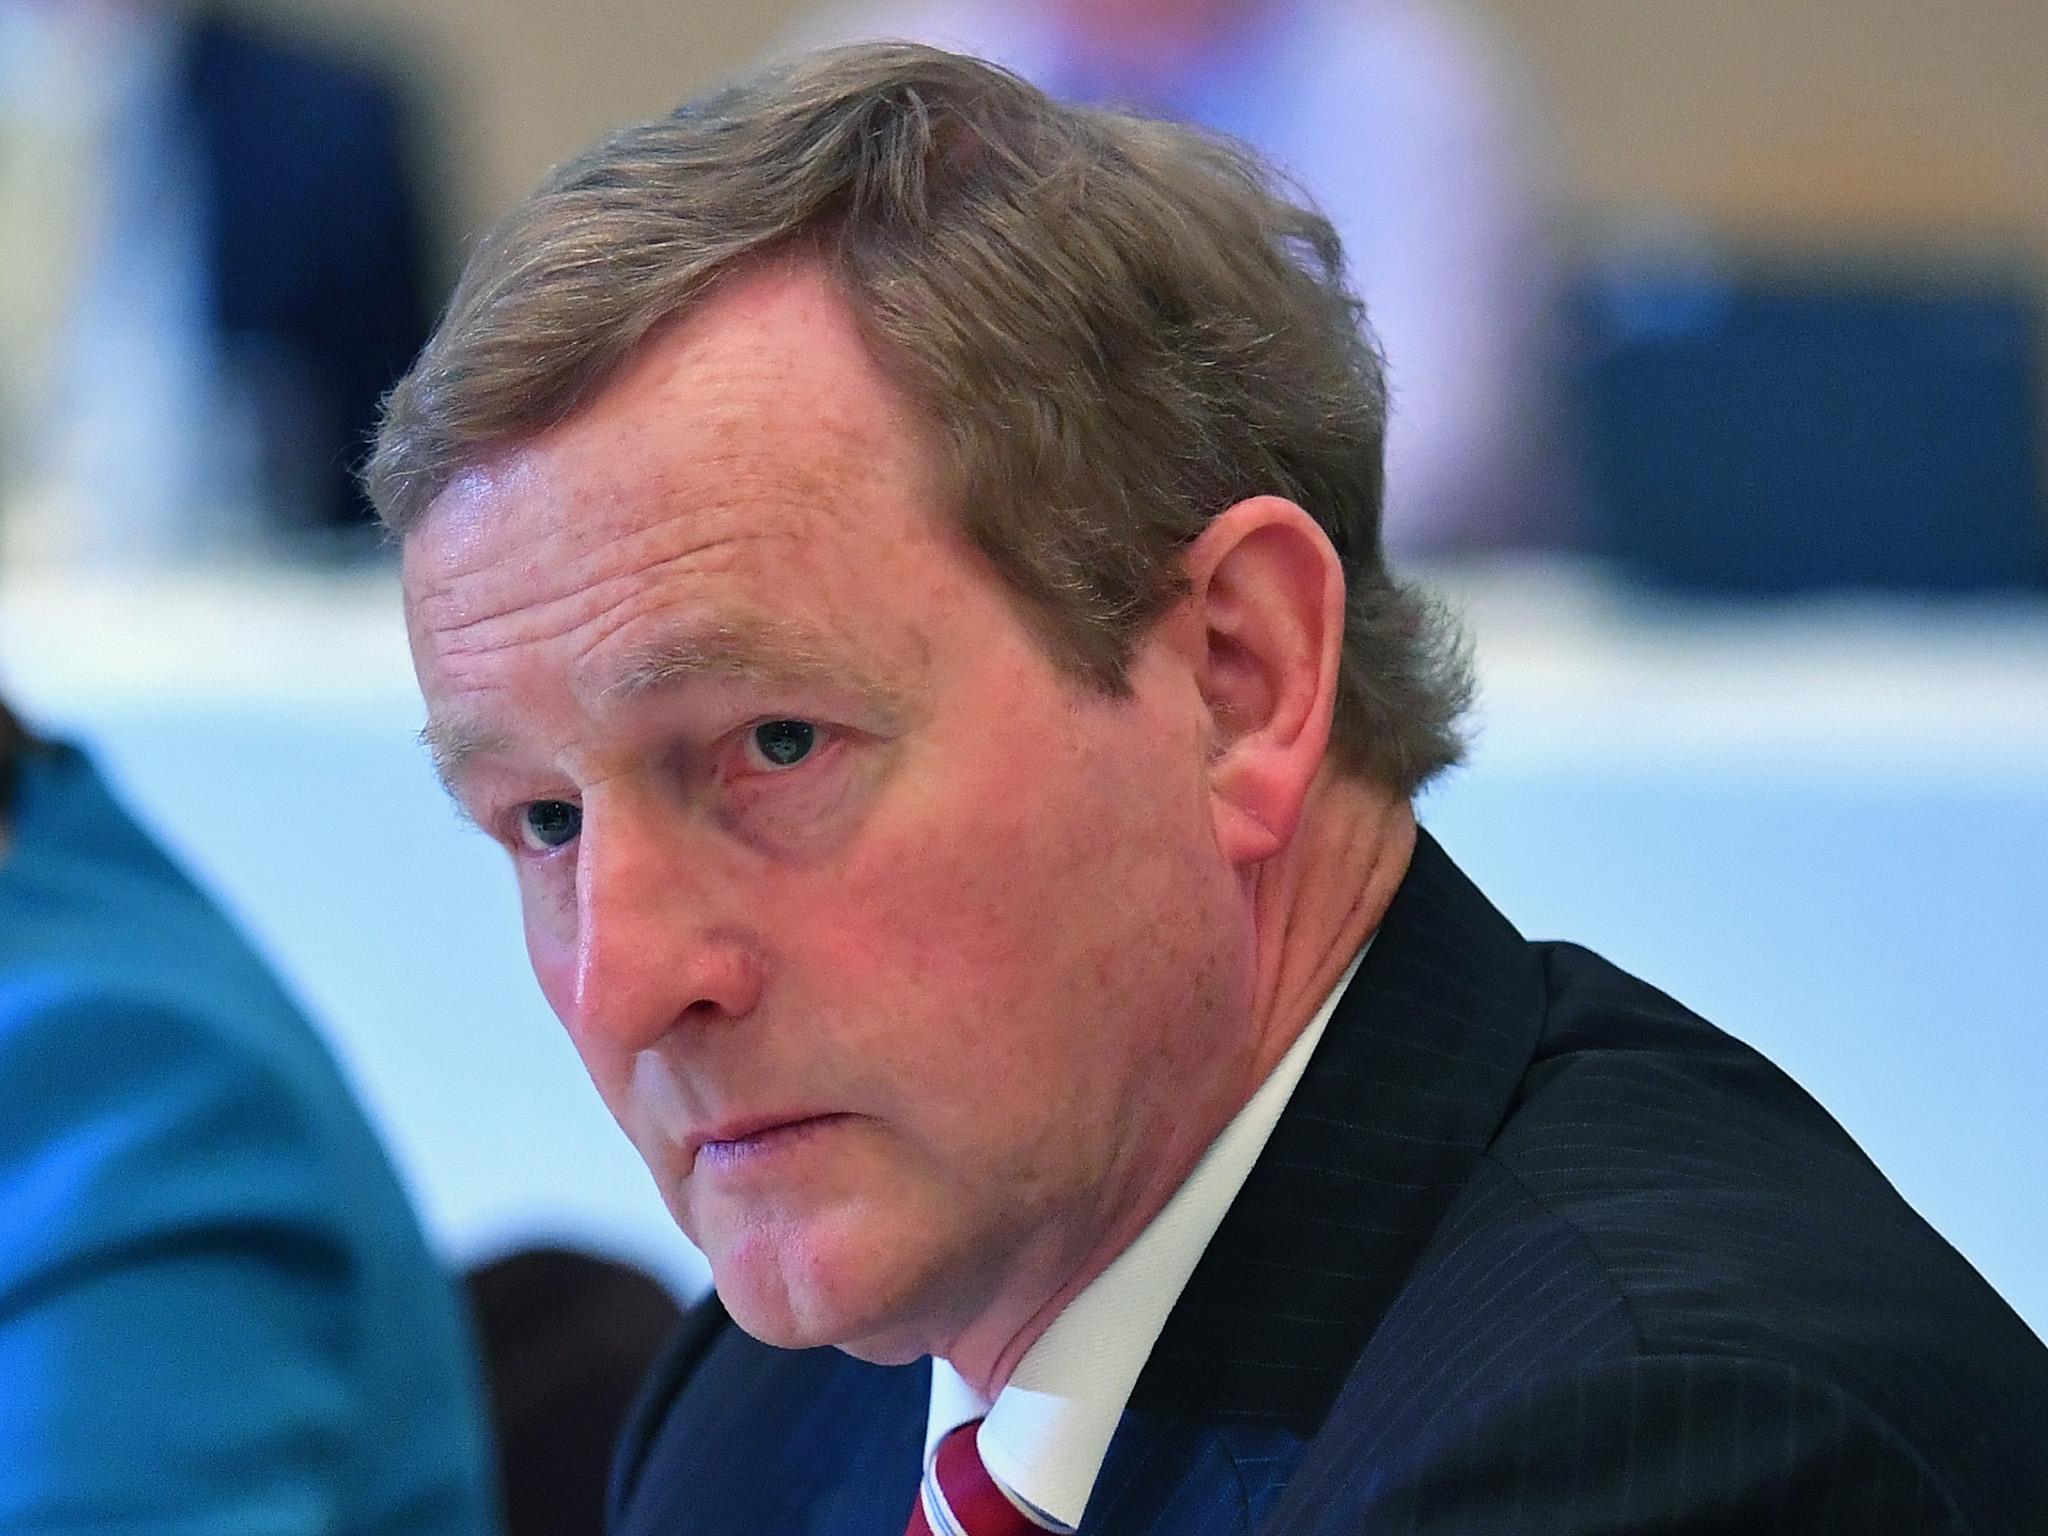 Enda Kenny, the Irish Premier, warned 'the other side of this argument may well get quite vicious' in the EU exit talks